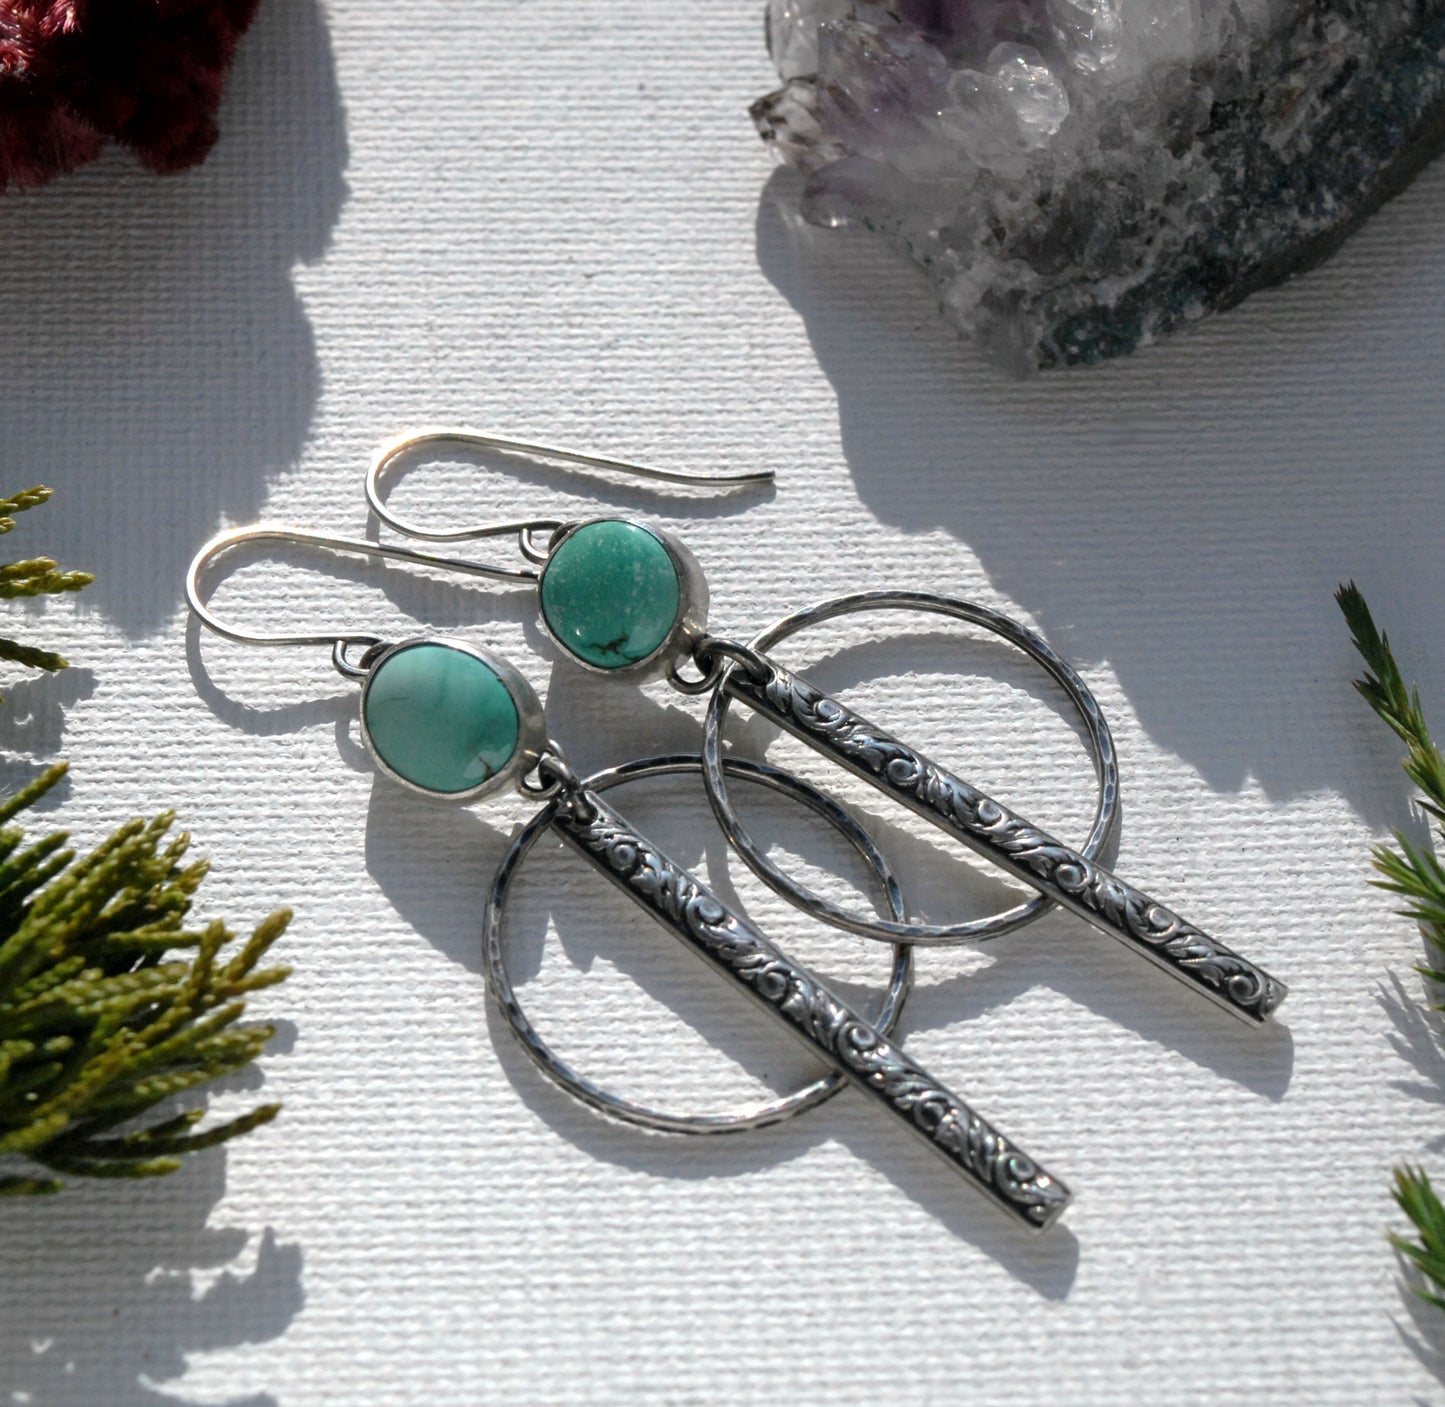 Turquoise & Sterling Silver Bar & Hoop Earrings | Carico Lake Turquoise with Patterned Bars & Hammered Hoops Dangles